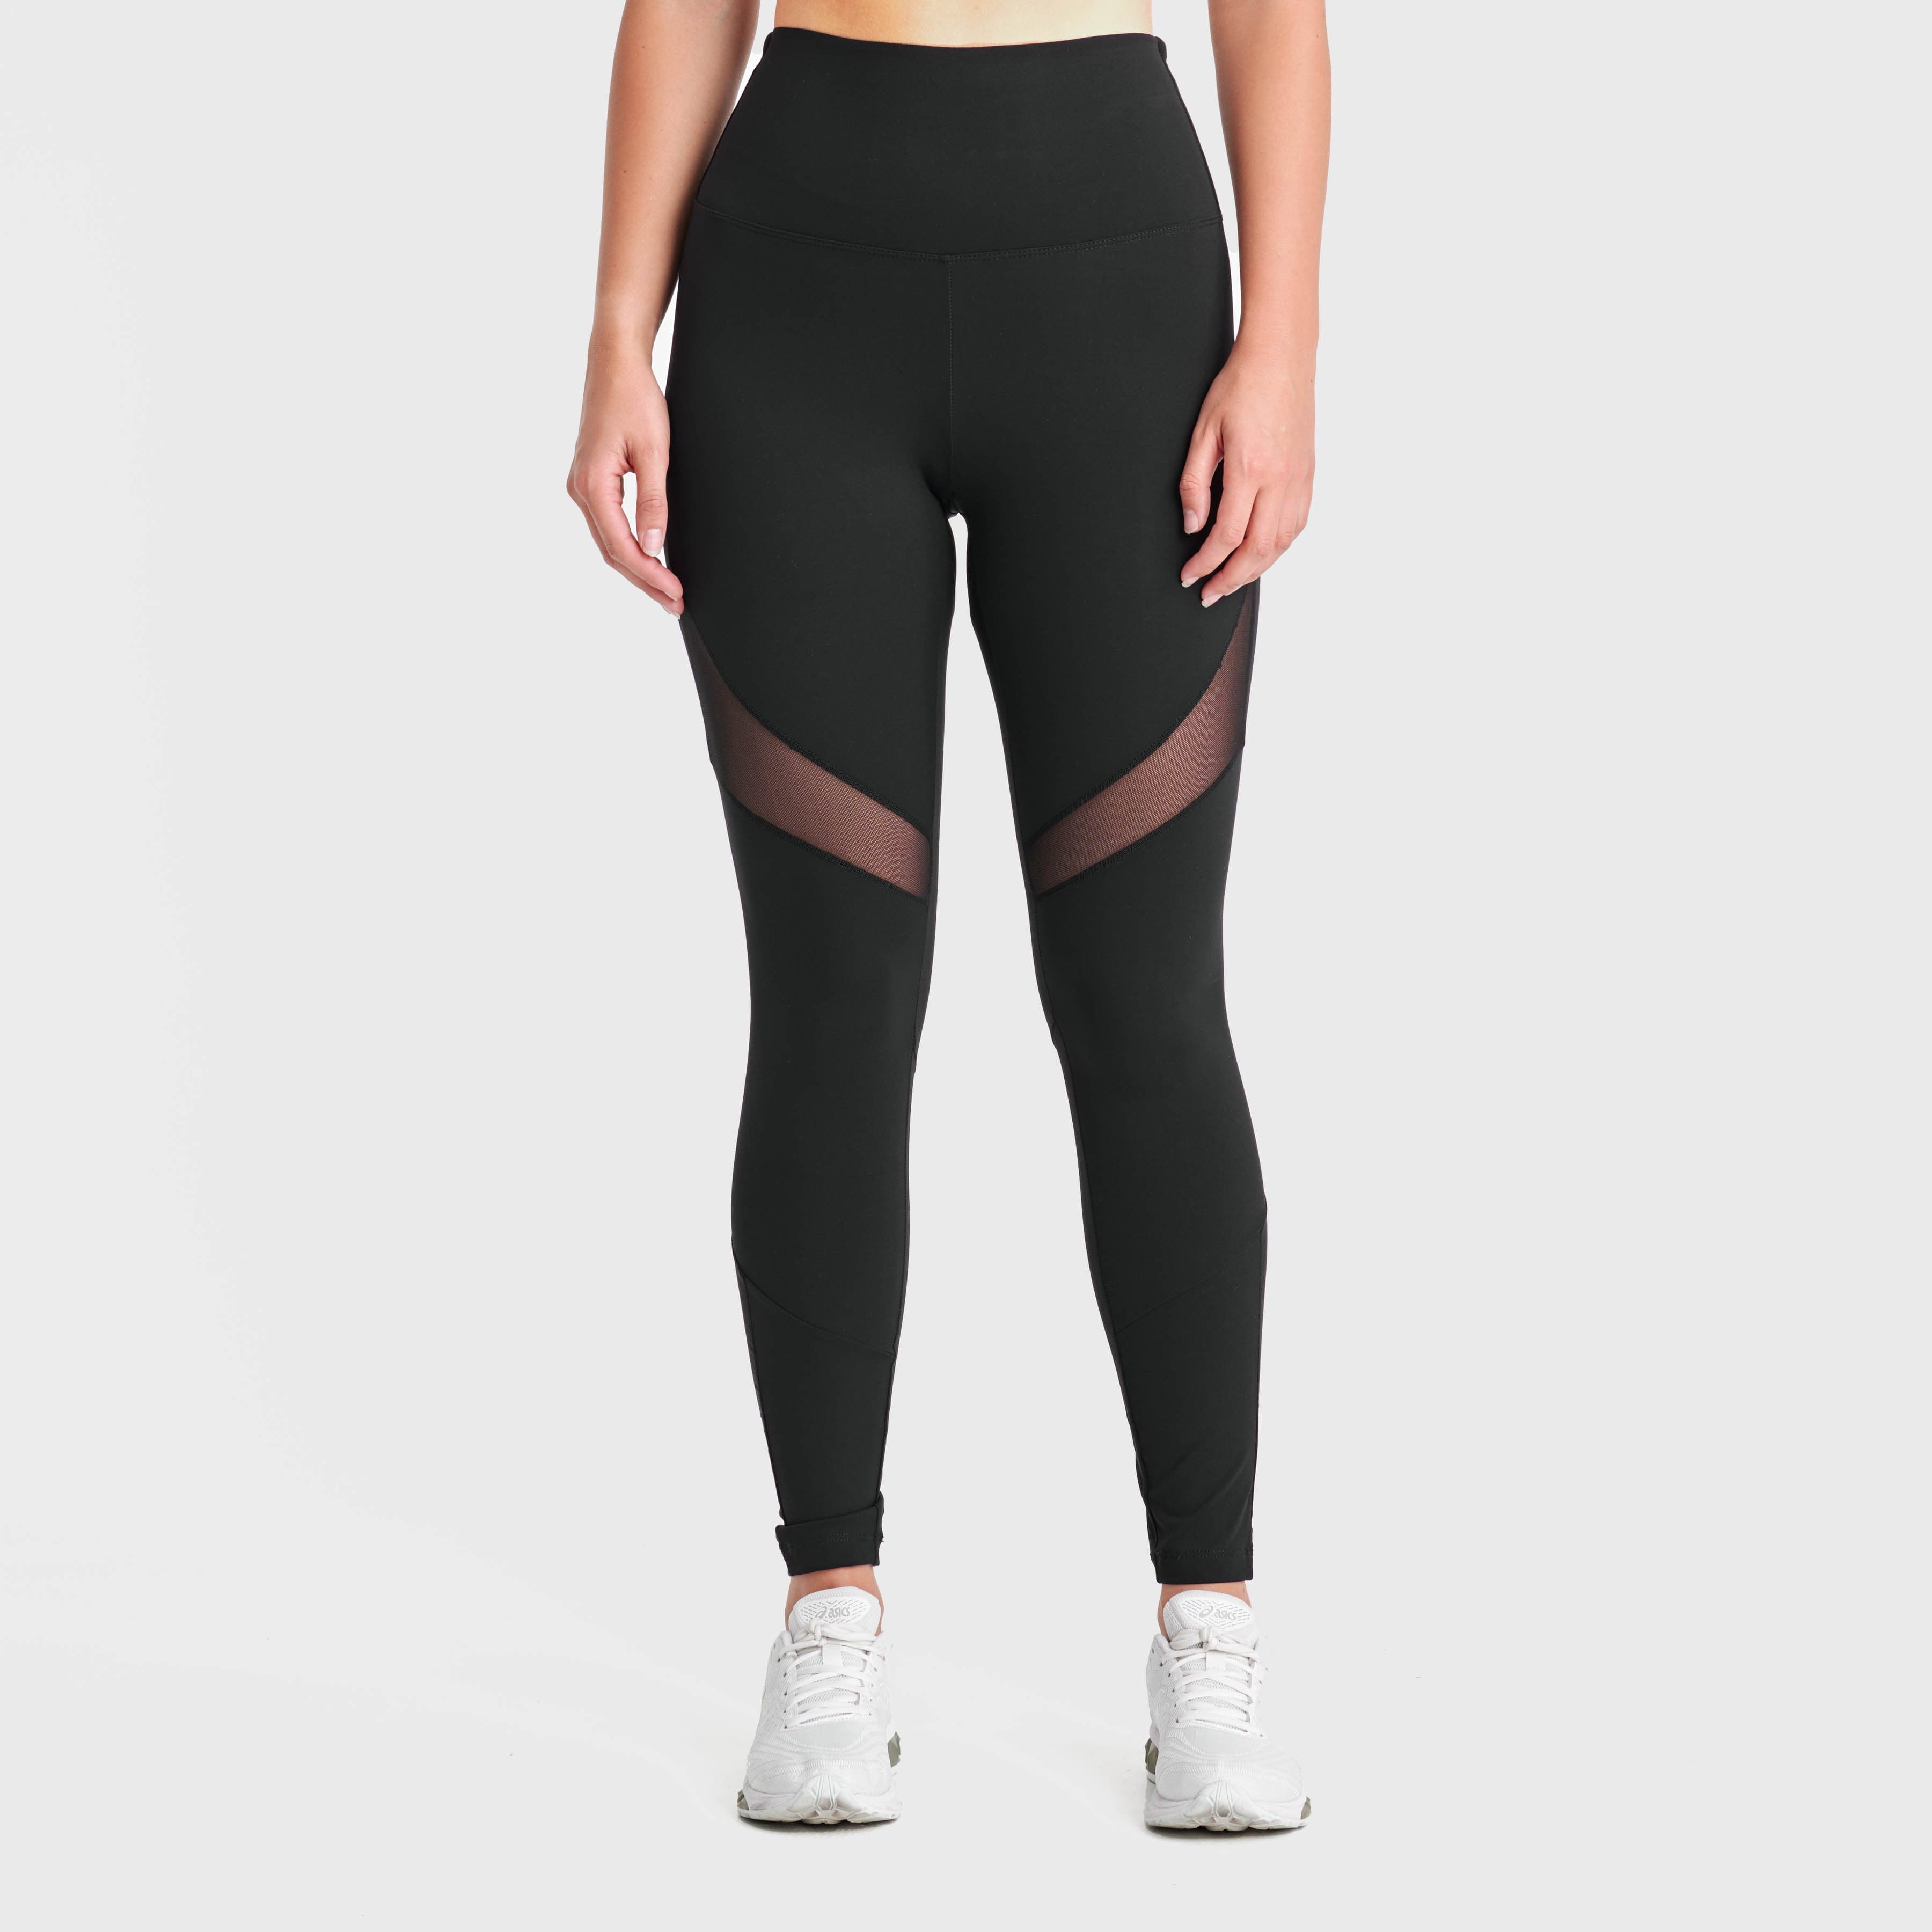 Superfit Diwo Pro With Mesh Detailing - High Waisted - Full Length - Black 1